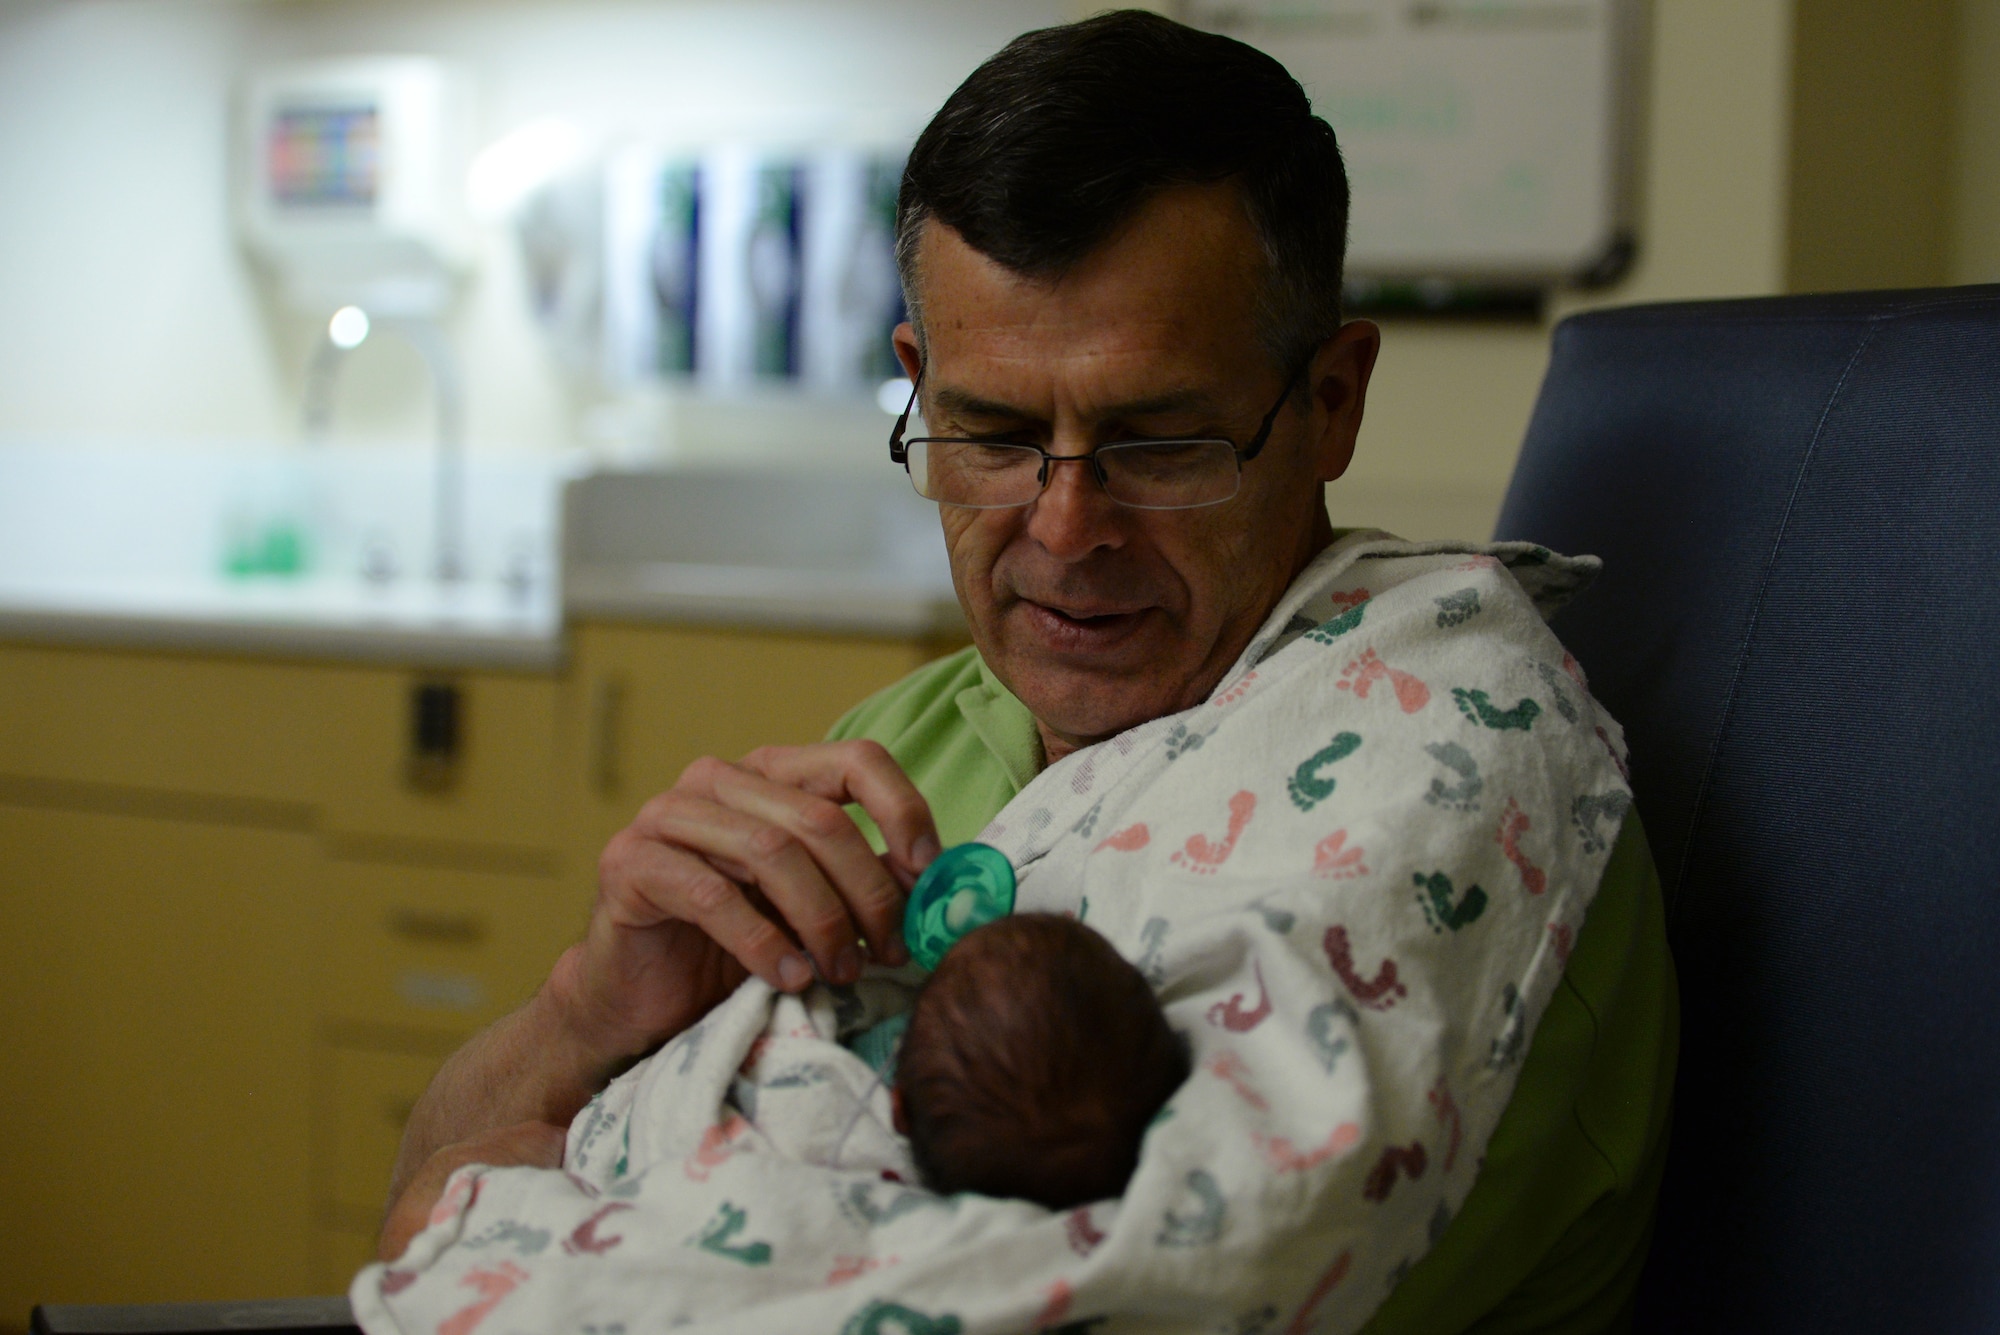 David Young, 60, Air Mobility Command current operations air mobility analyst and retired Air Force pilot, offers a pacifier to a premature baby in the Neonatal Intensive Care Unit at Mercy Hospital in St. Louis, April 19, 2019. Young participates in a “cuddler program” organized by the hospital to boost the babies’ brain development and increase their overall survival rate. (U.S. Air Force photo by Airman 1st Class Miranda Simpson)